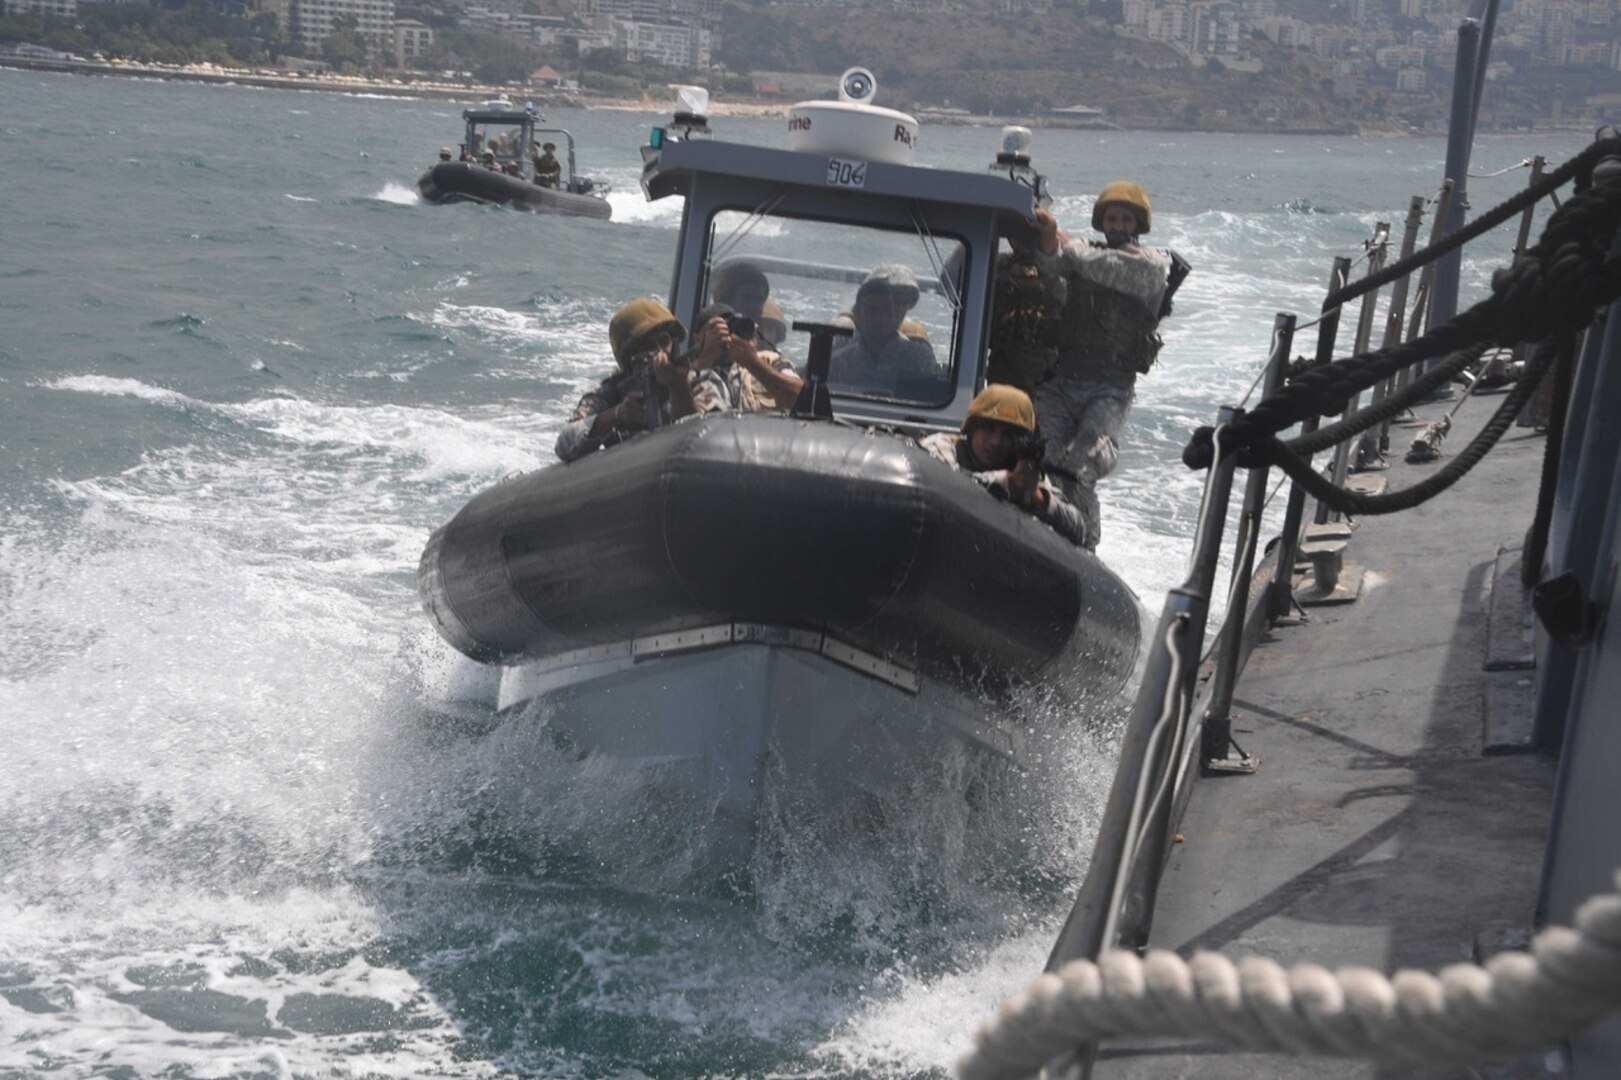 Members of the Lebanese Armed Forces (LAF) Marine Commando Regiment pull alongside a ship as part of a visit, board, search and seizure drill during exercise Resolute Response (RR) 19. RR19 is an annual bilateral explosive ordnance disposal and maritime security exercise between U.S. 5th Fleet and LAF to enhance mutual capabilities and interoperability. (U.S. Navy photo by Mass Communication Specialist 3rd Class Dawson Roth/Released)